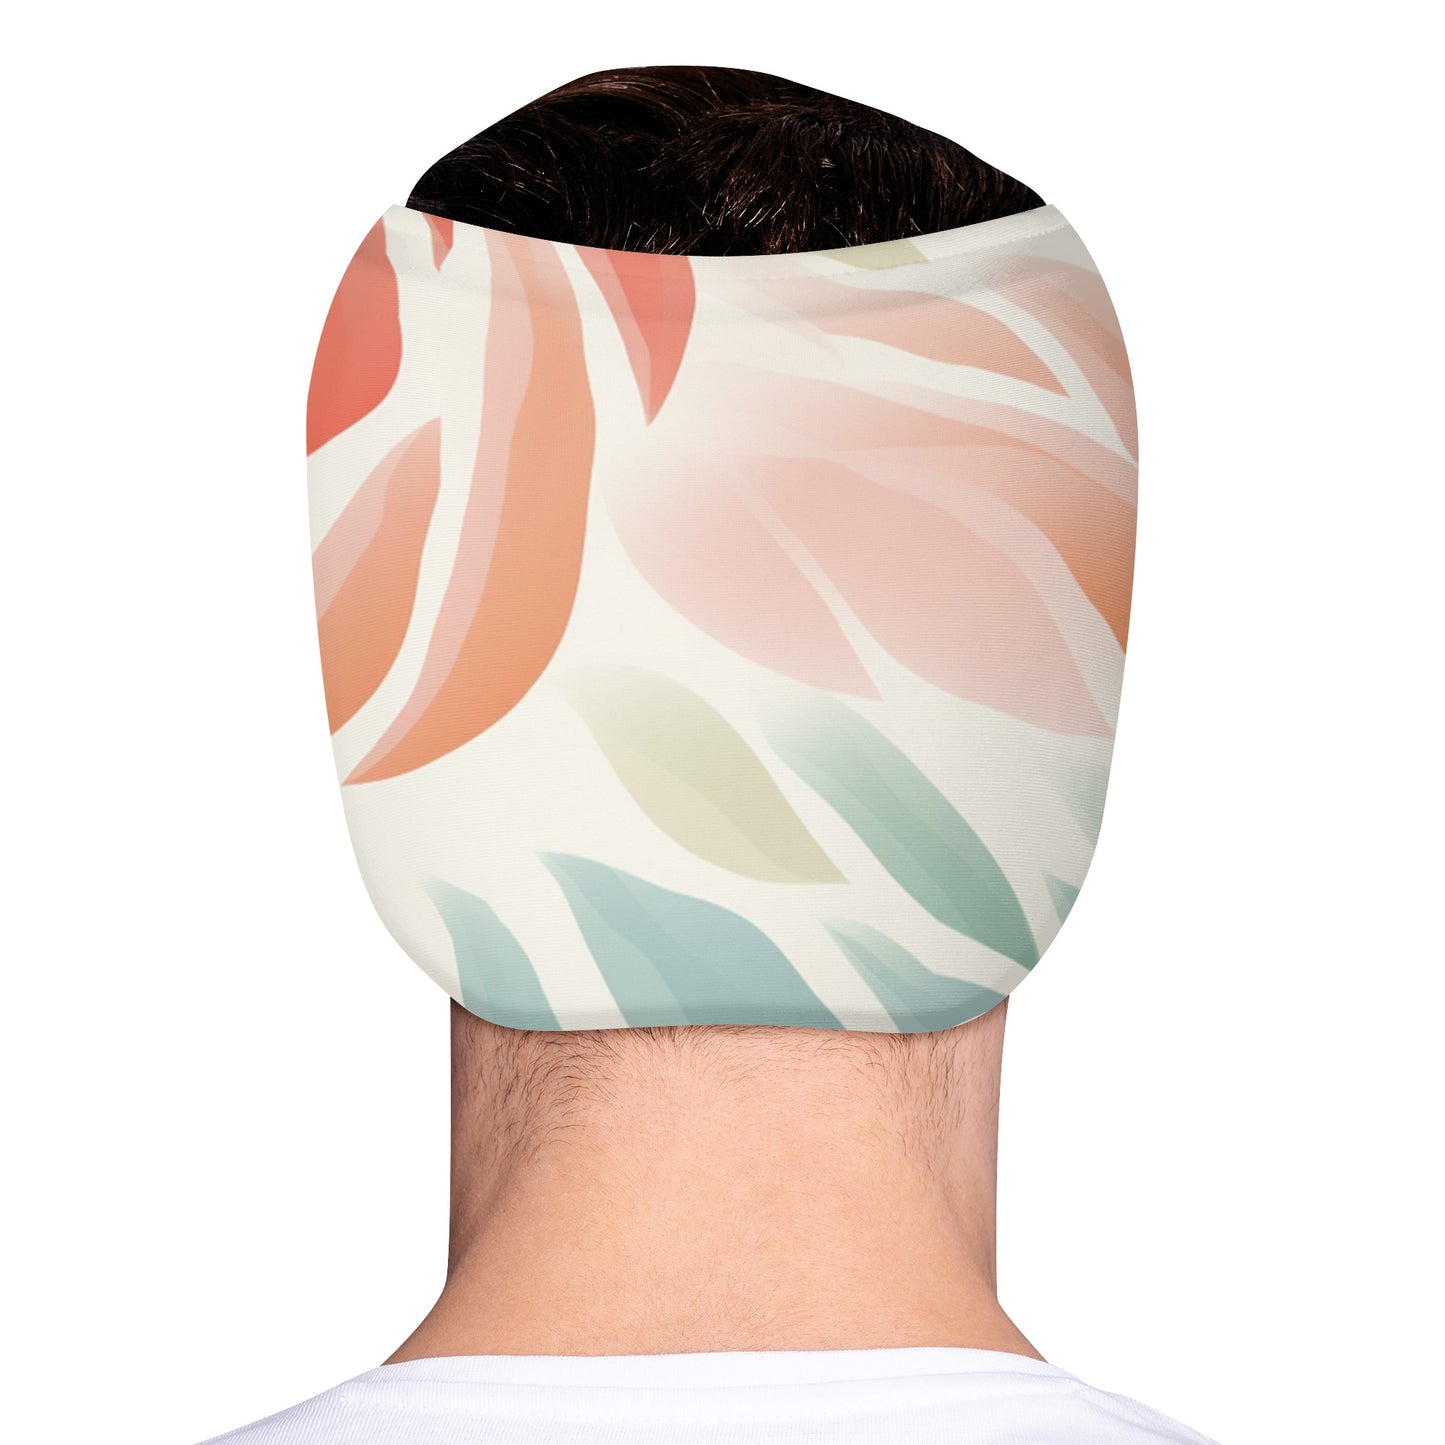 Neduz Designs Artified Collection - Colorful Leaves Ice Head Wrap